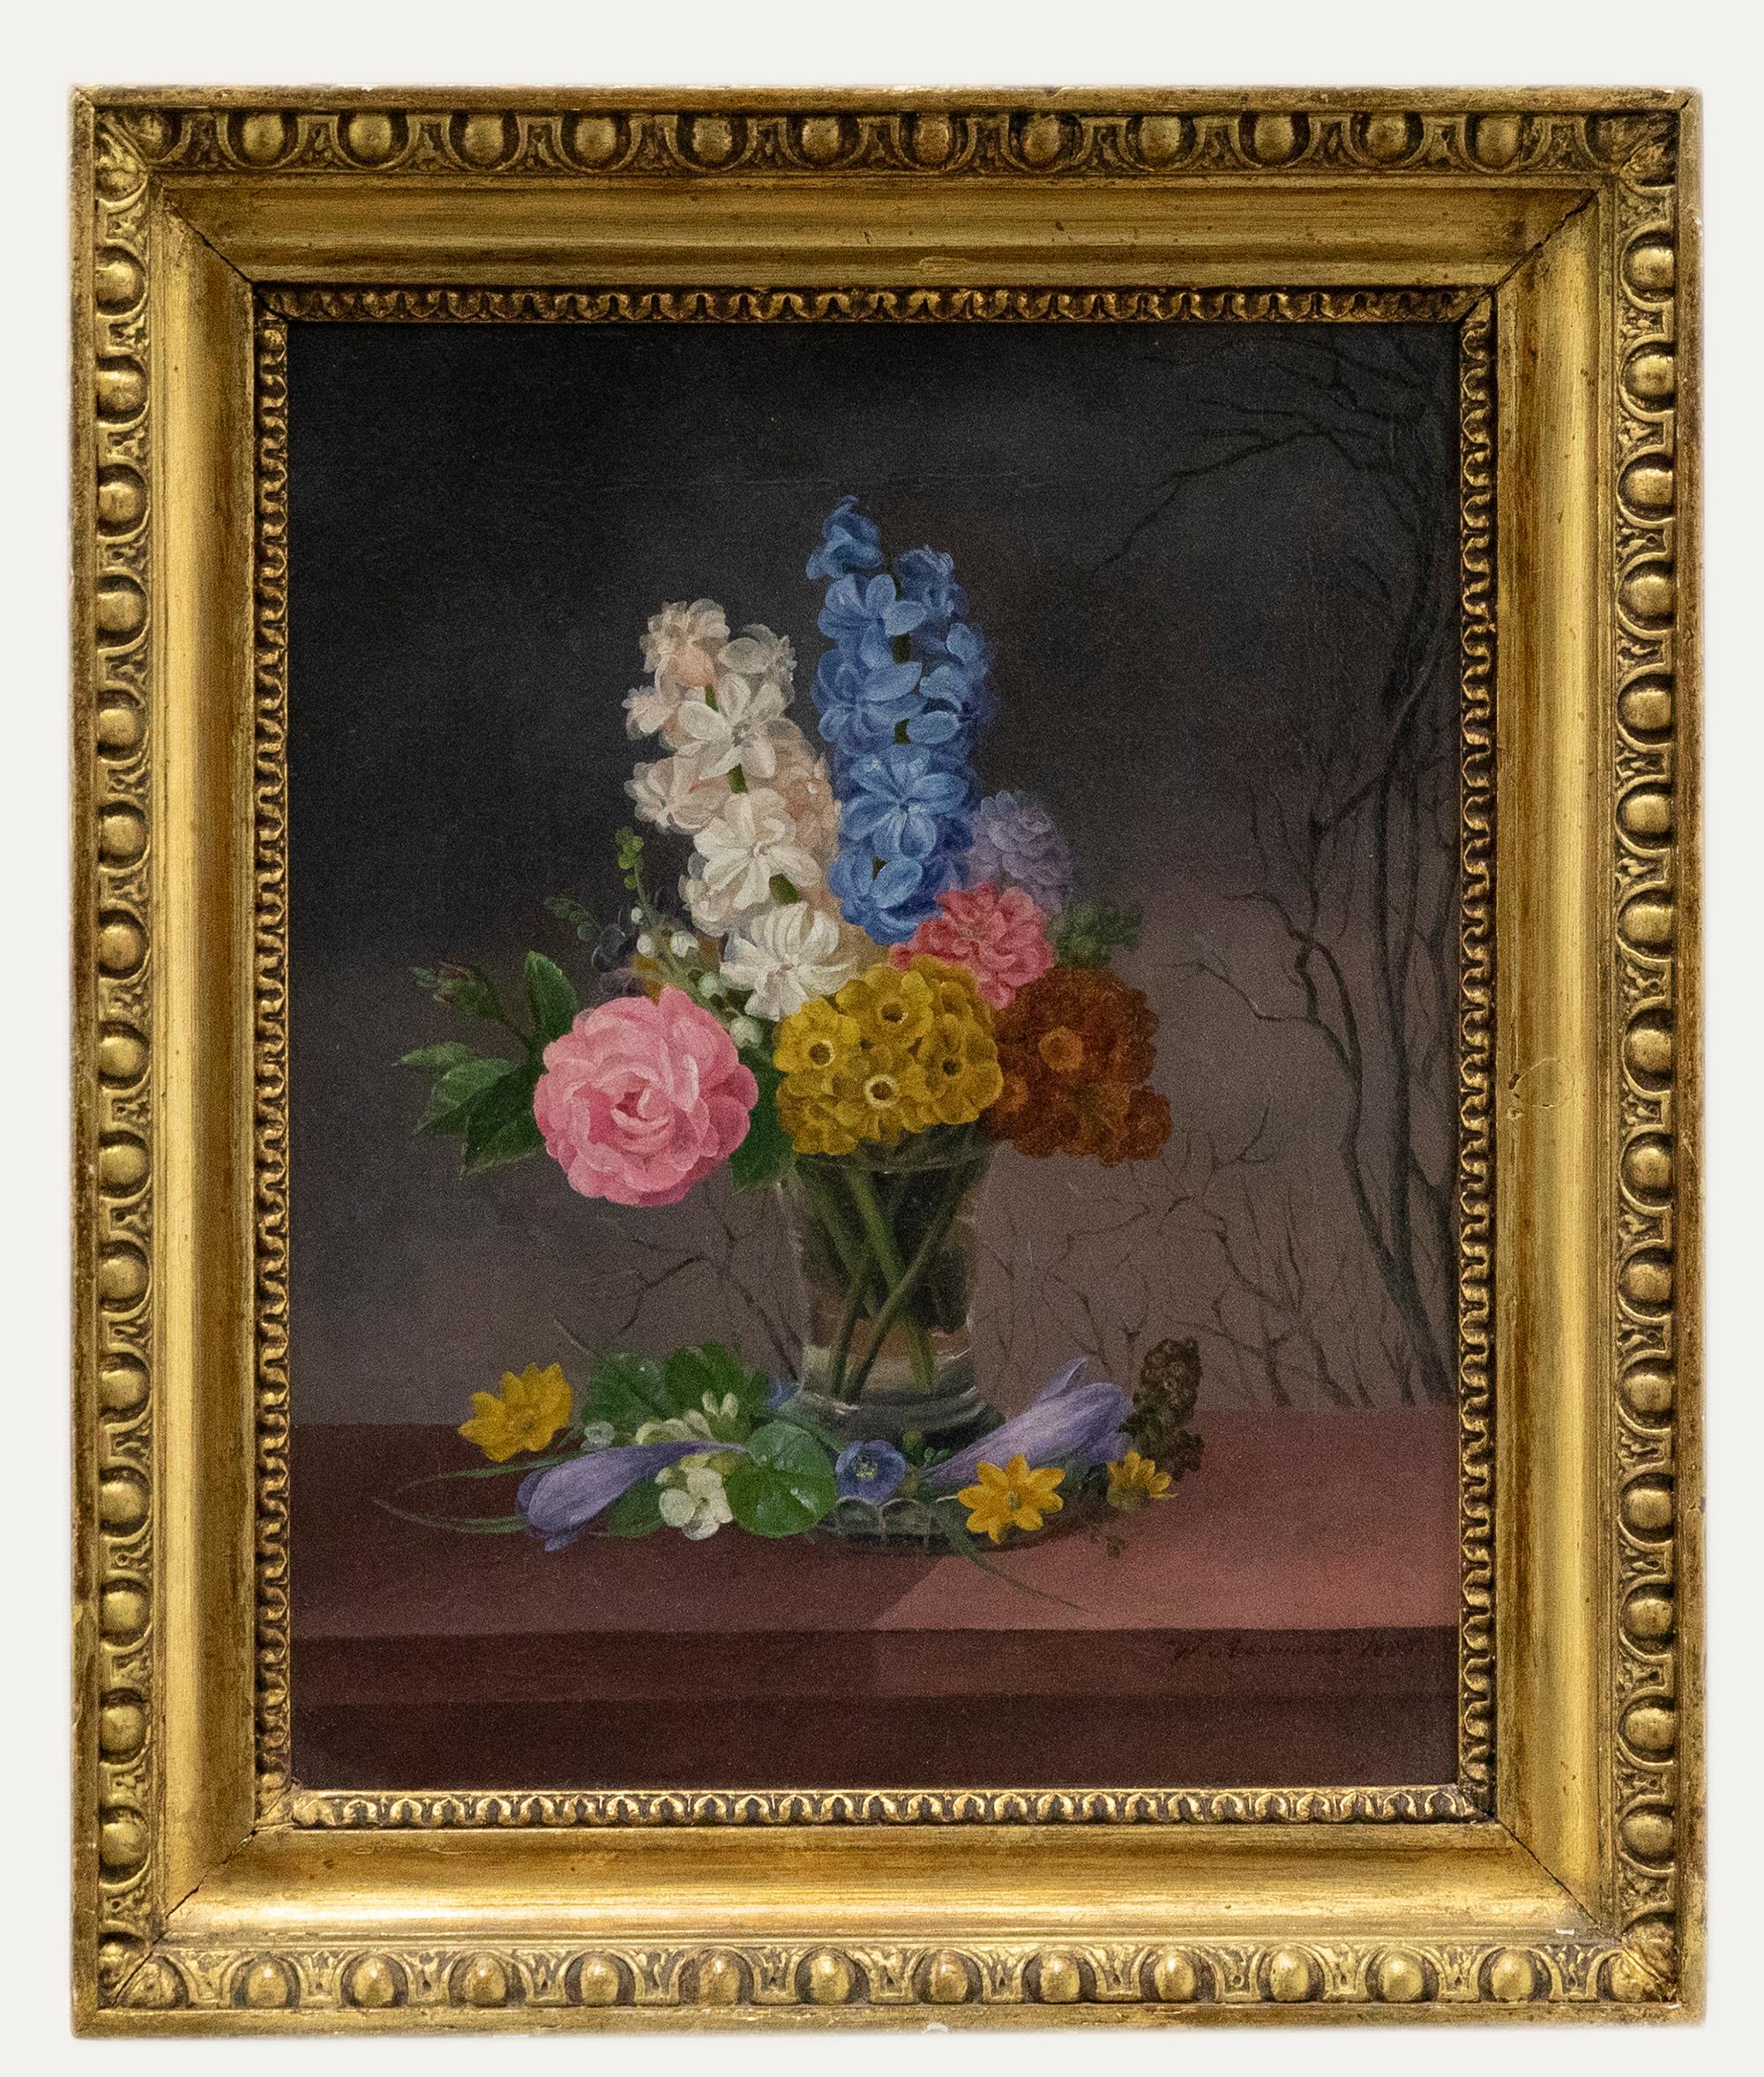 Unknown Still-Life Painting - Willem Ackermann (act. 1830-1845) - 1830 Oil, Hyacinths and Roses